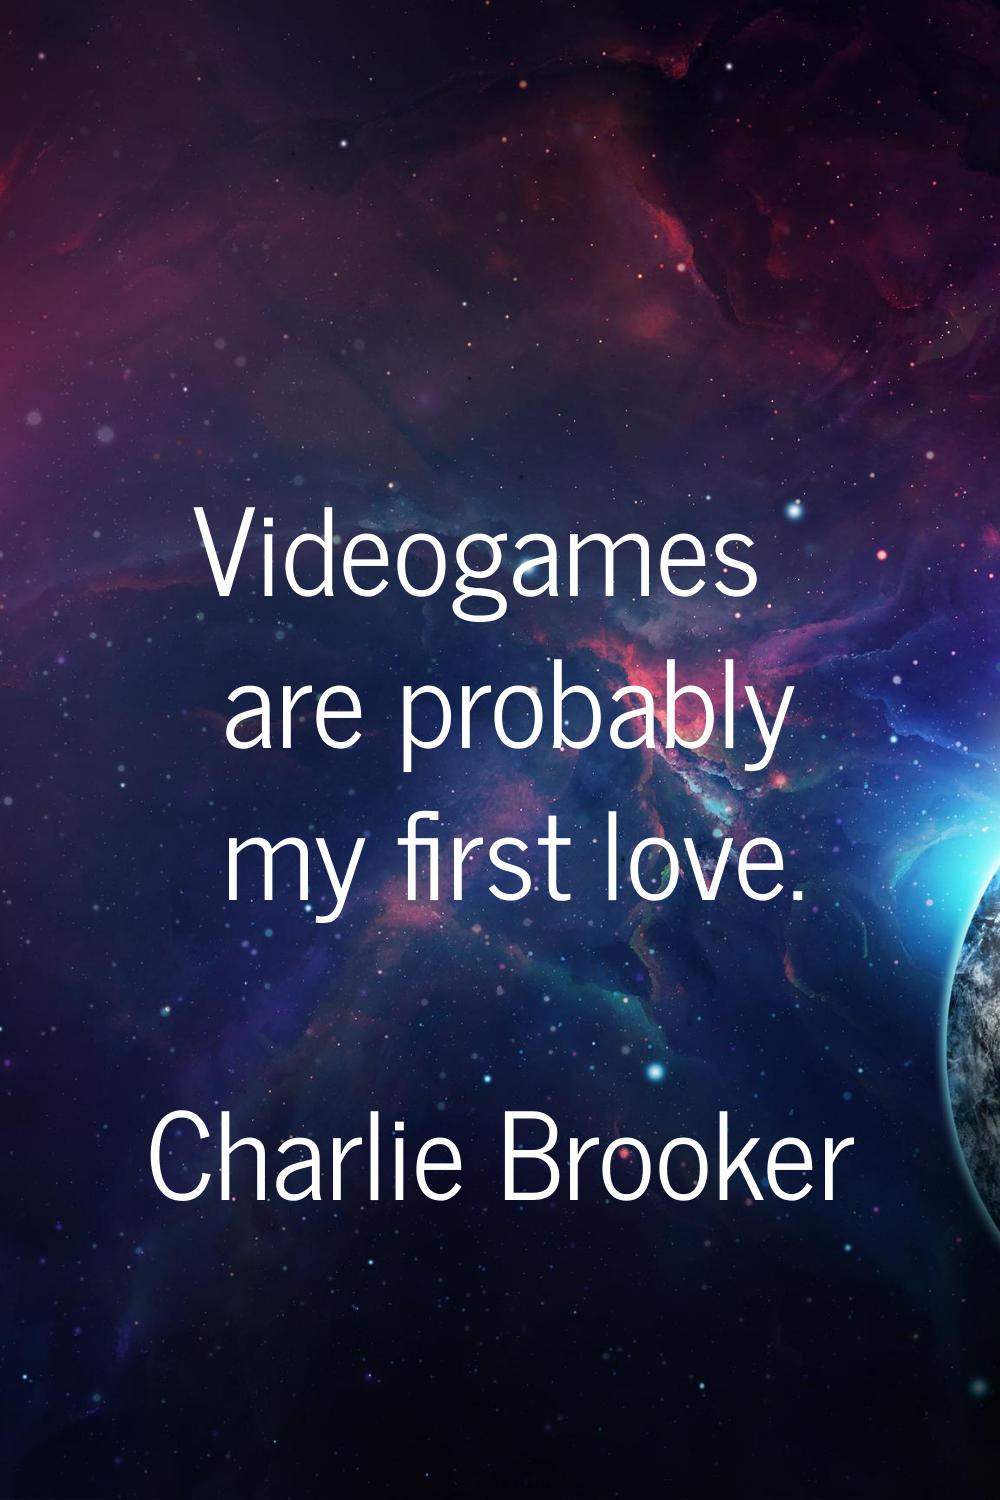 Videogames are probably my first love.